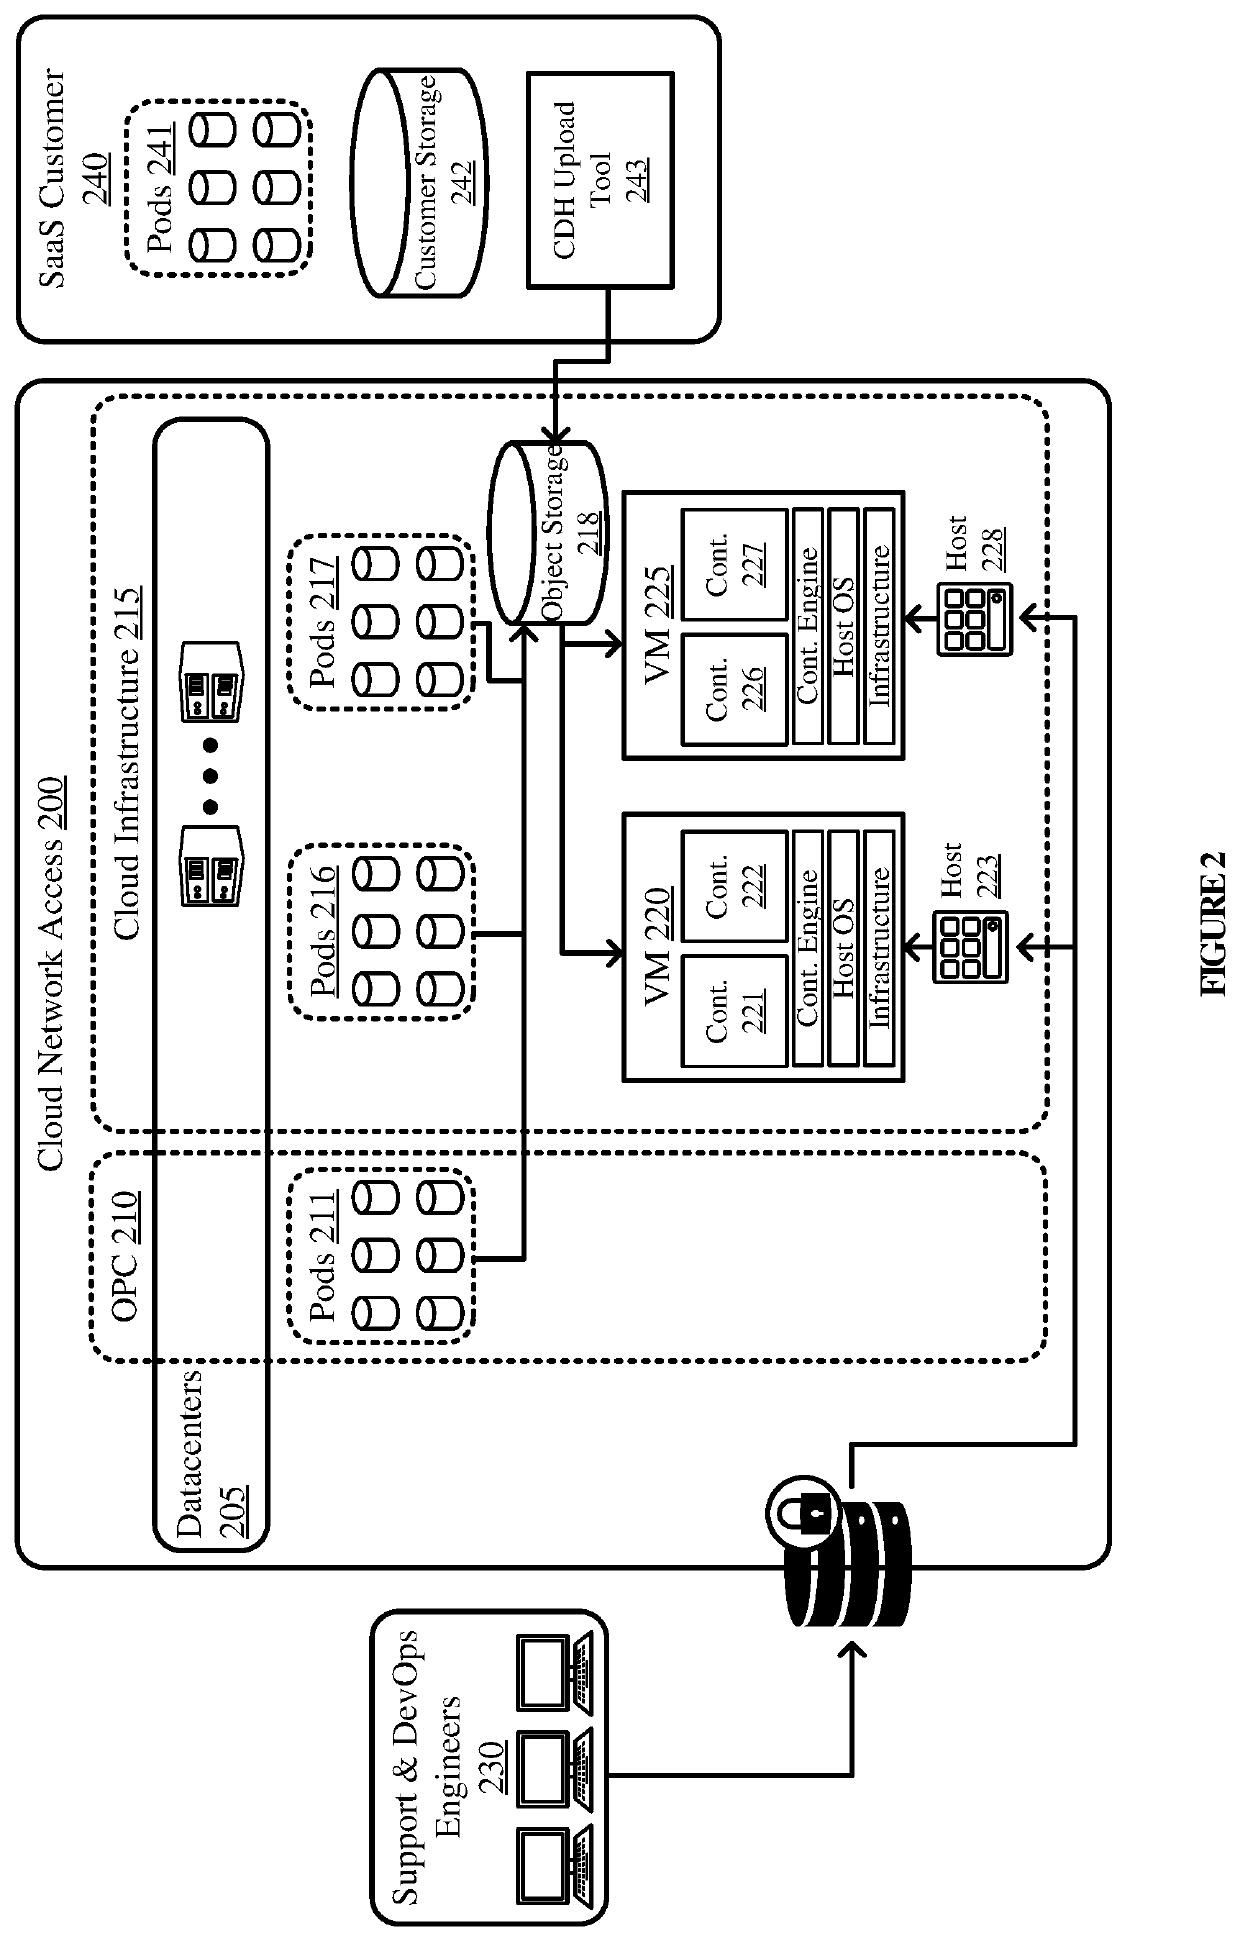 Systems and methods for customer data handling